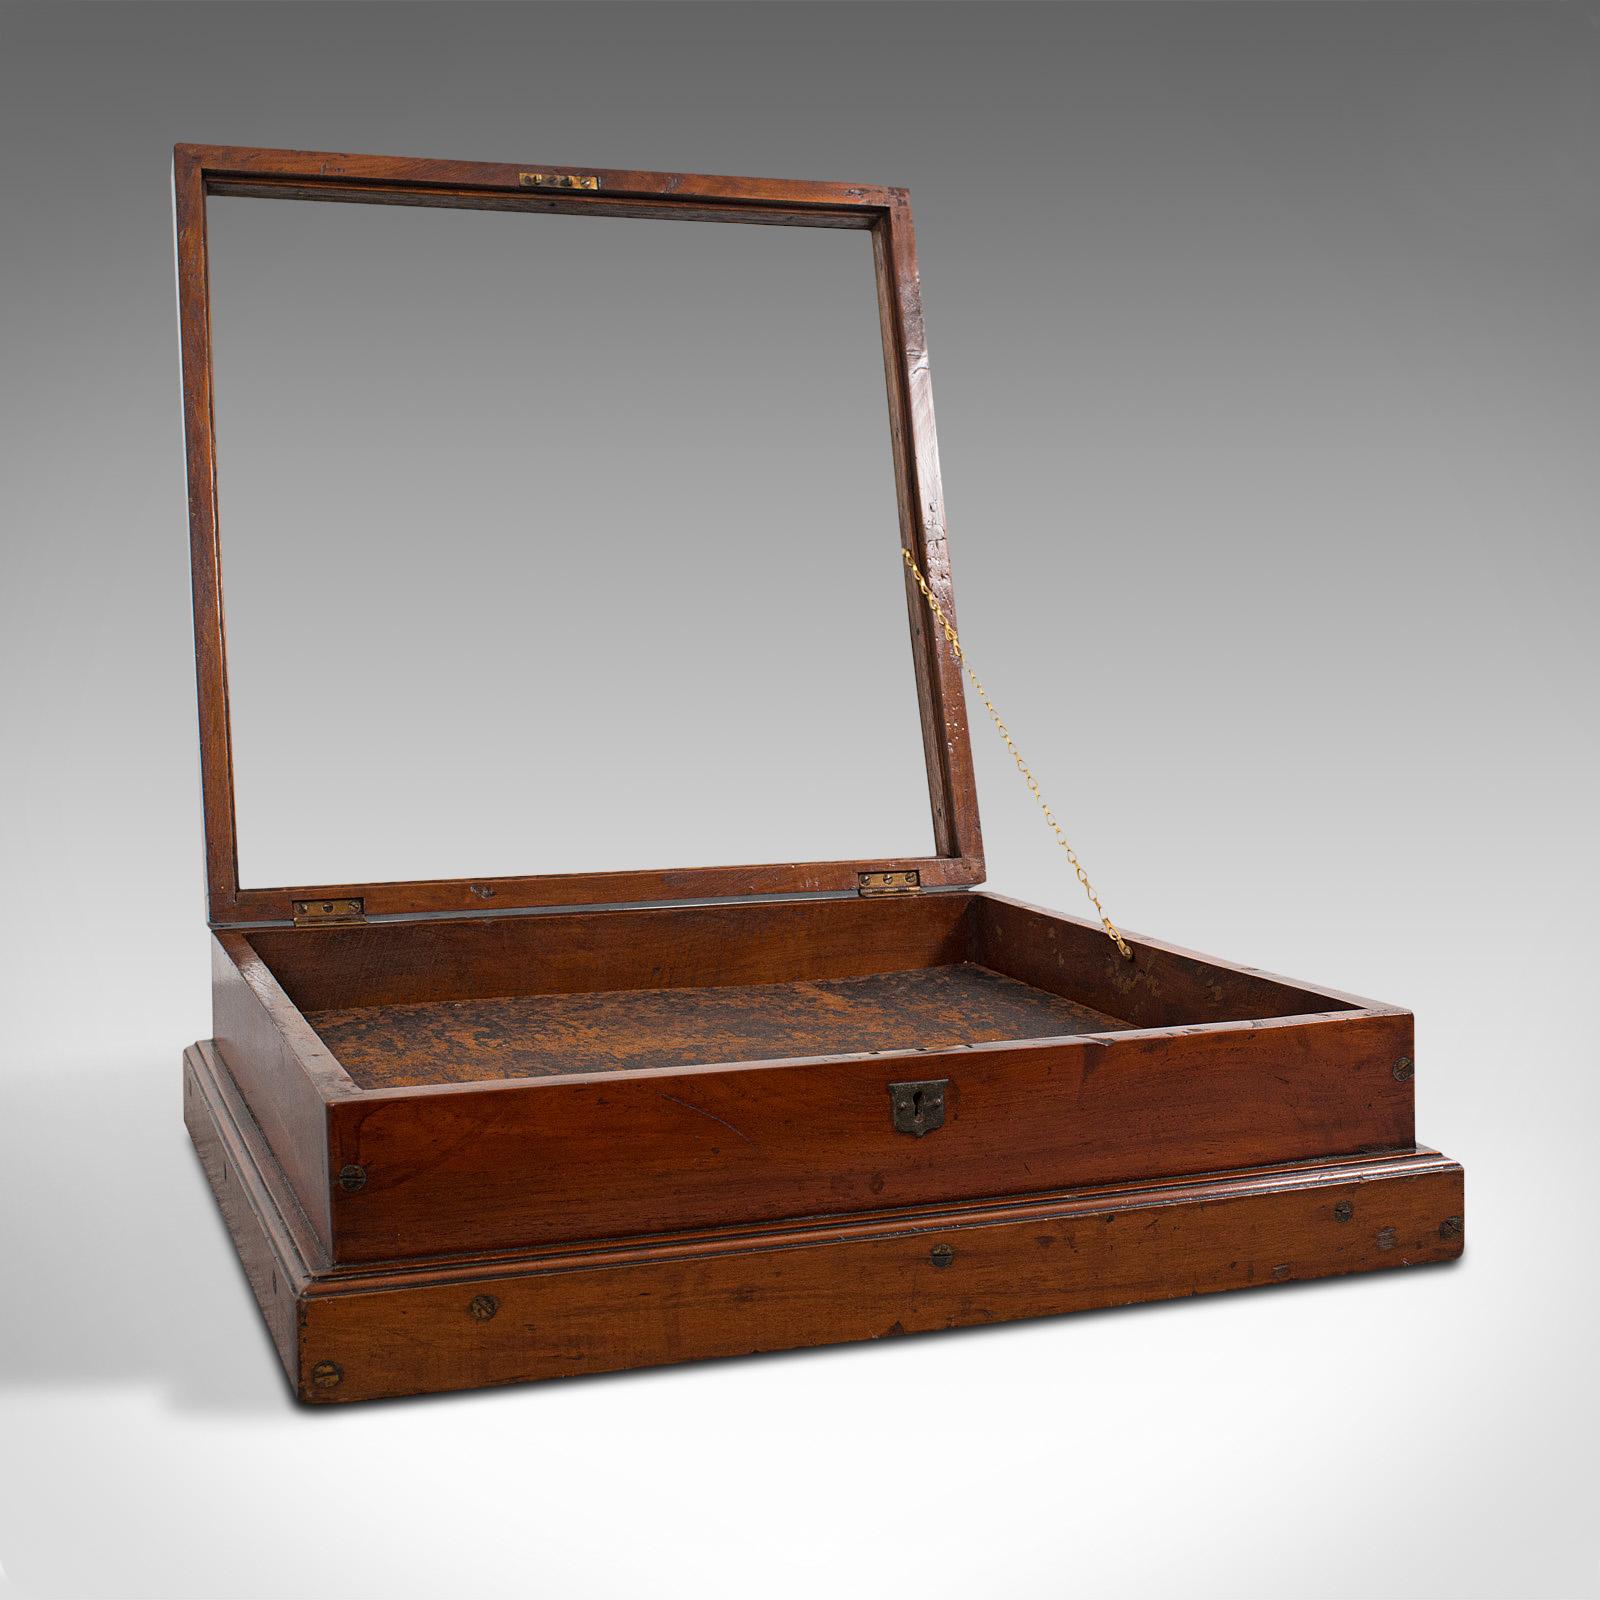 This is an antique shop's countertop bijouterie case. an English, walnut and glass retail display cabinet, ideal for jewelry, dating to the Victorian period, circa 1870.

Beautifully crafted Victorian display showcase
Displaying a desirable aged